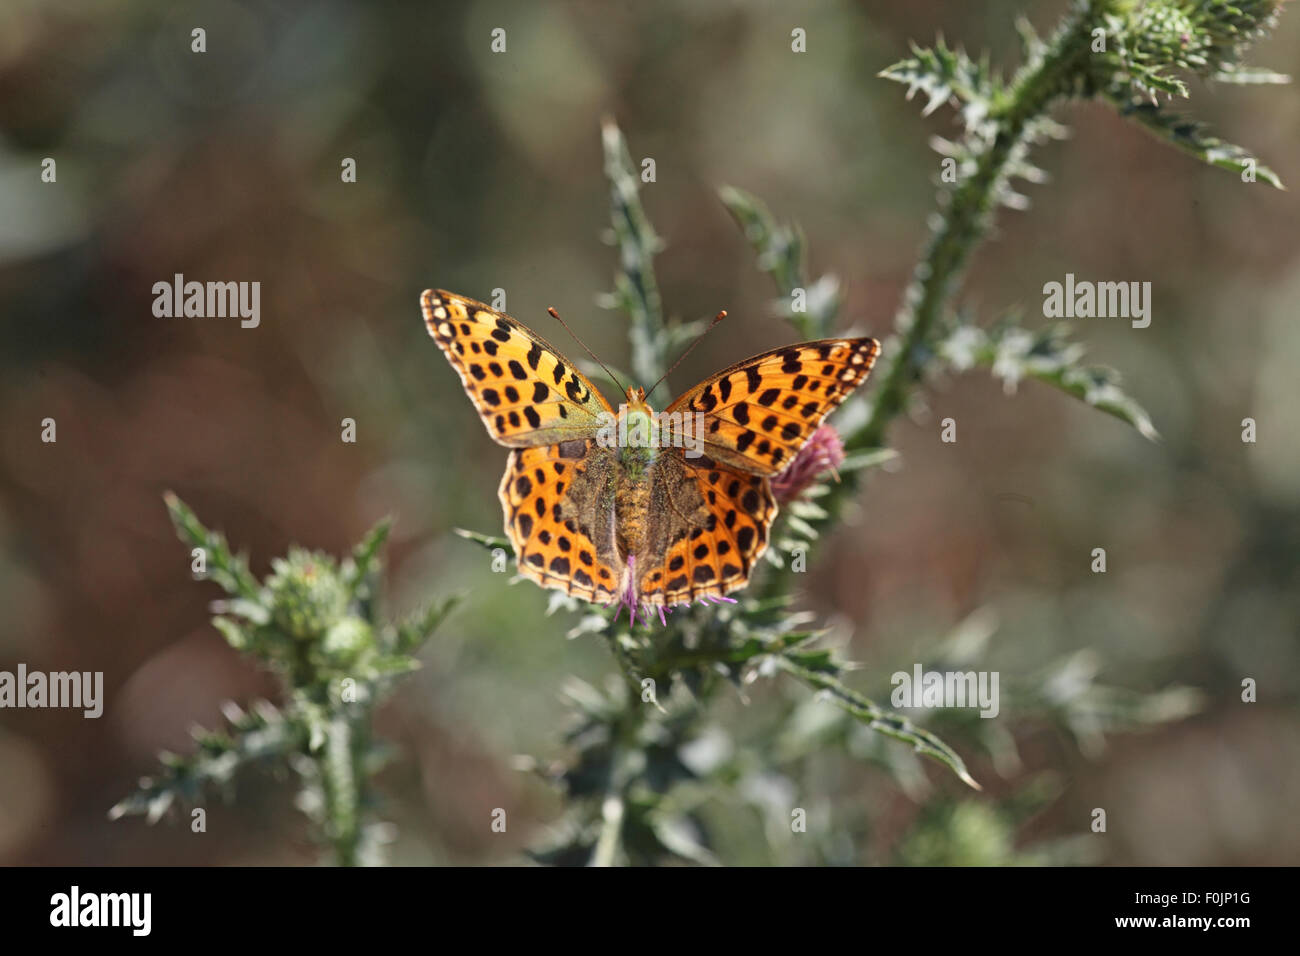 Queen of Spain fritillary Issoria lithonia  taking nectar from thistle Stock Photo